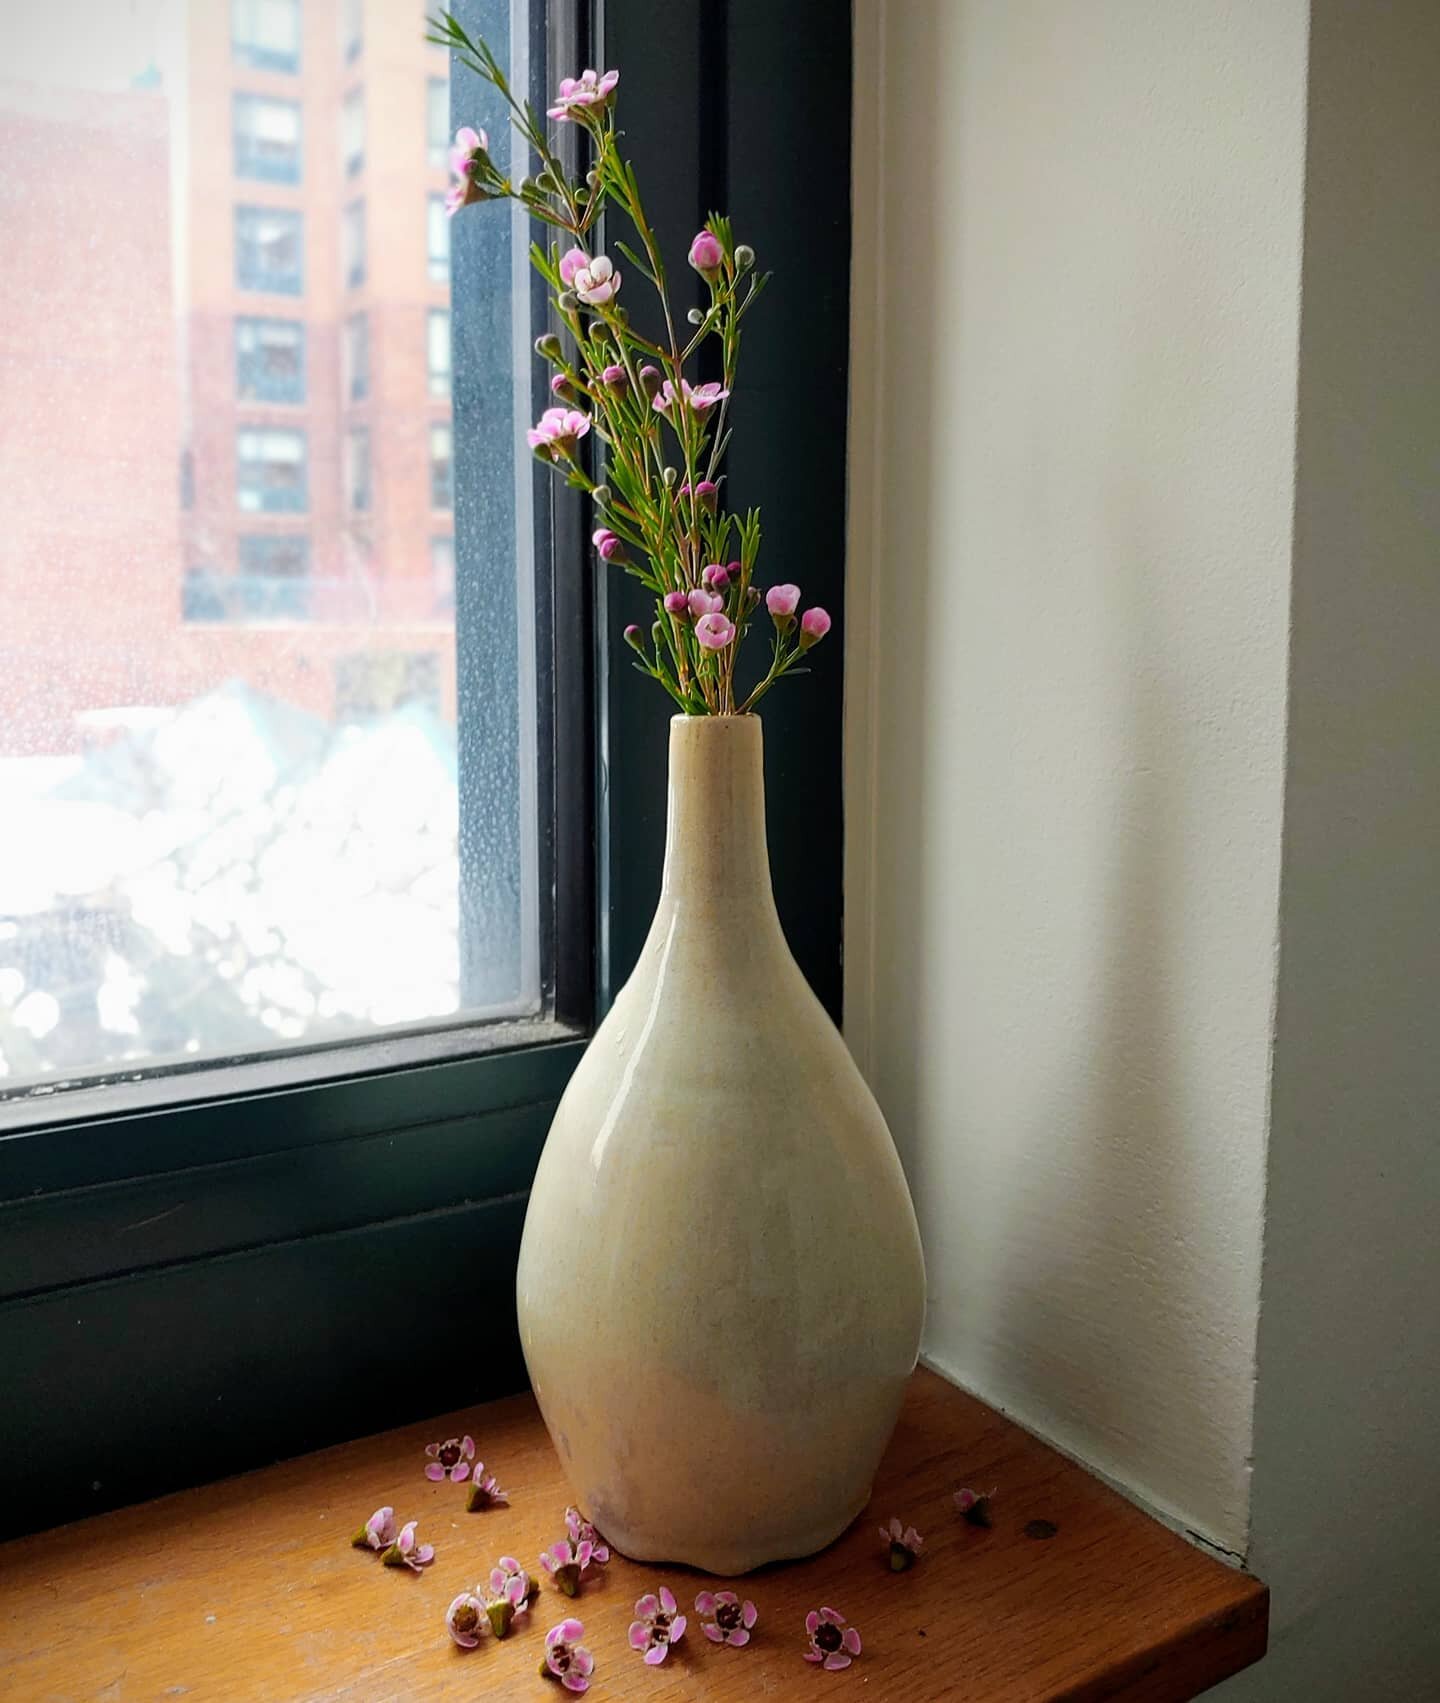 Vases can be quite challenging. 

When throwing on a wheel you have an enormous space of possible forms. But ultimately you're restricted to rotational symmetry, and that can help to define your work. Functional wares like cups or plates are restrict